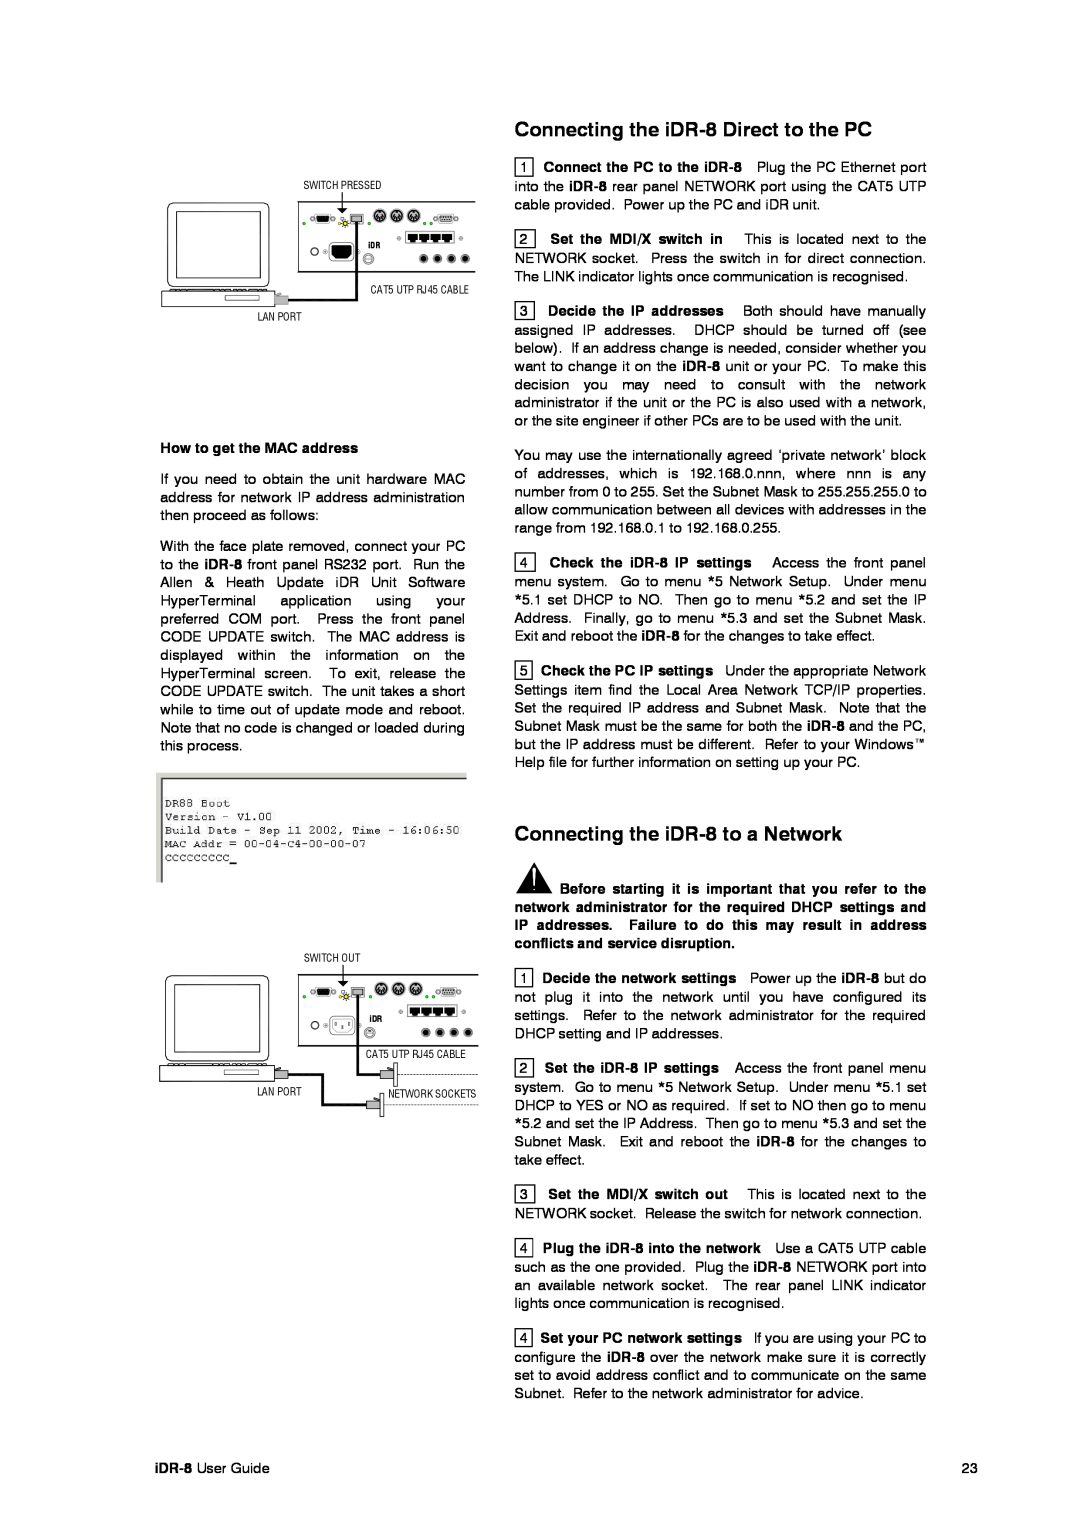 Compex Systems AP4530 Connecting the iDR-8 Direct to the PC, Connecting the iDR-8 to a Network, How to get the MAC address 